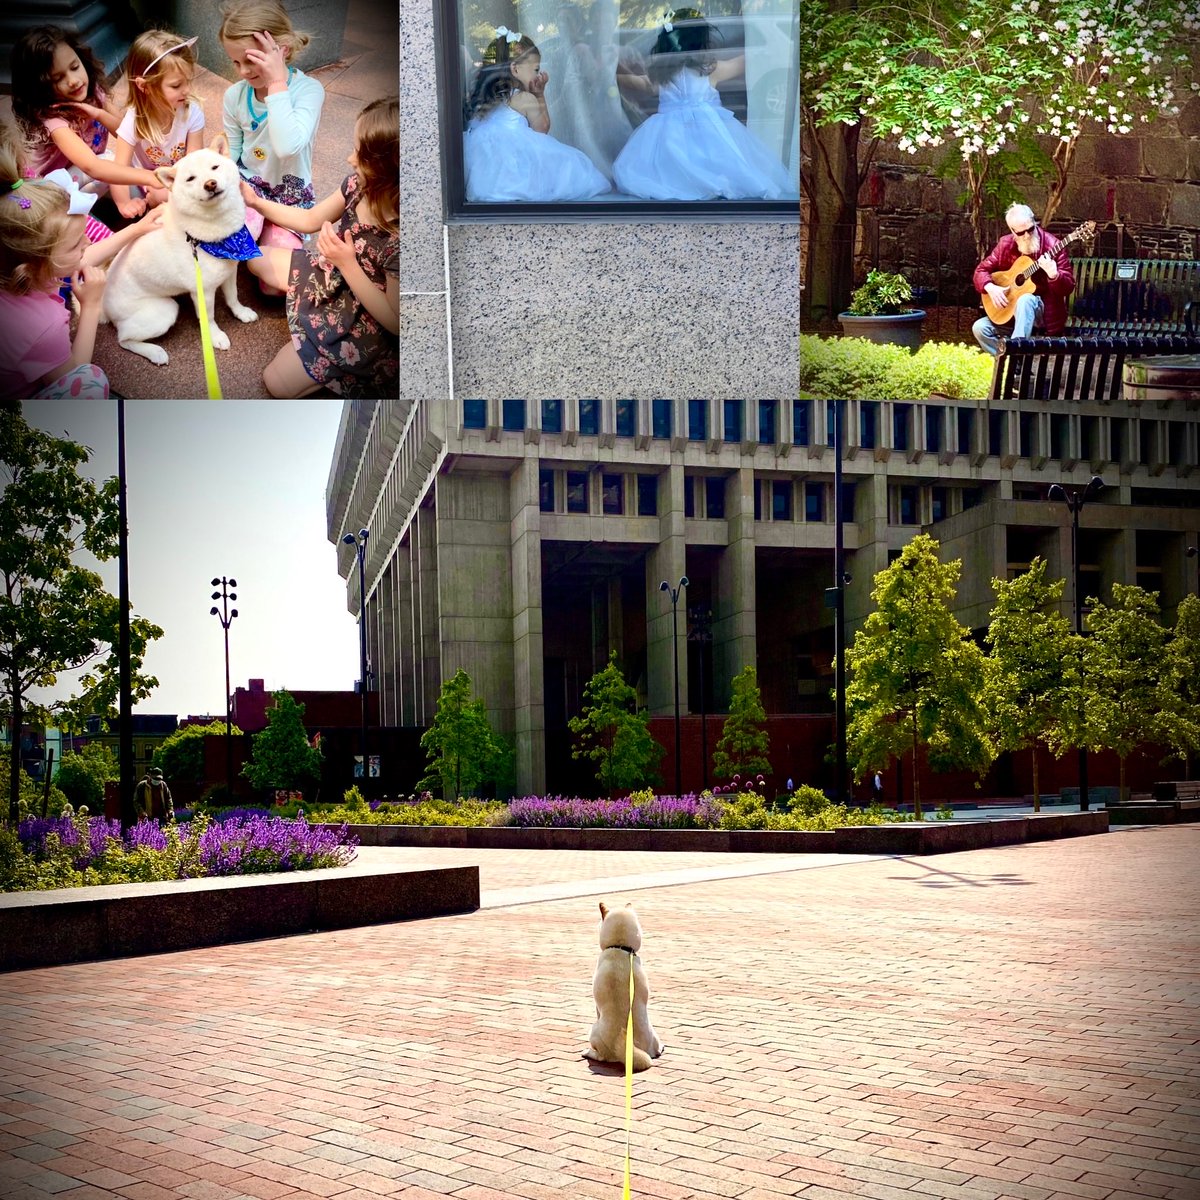 Scenes from an early summer day in downtown Boston.  We caught two little flower girls hiding in the window at the old Ritz and a gentleman playing morning blues while Oda enjoyed the new plantings at City Hall and new fans at the playground.  #bostoncityhall #beaconhill #backbay